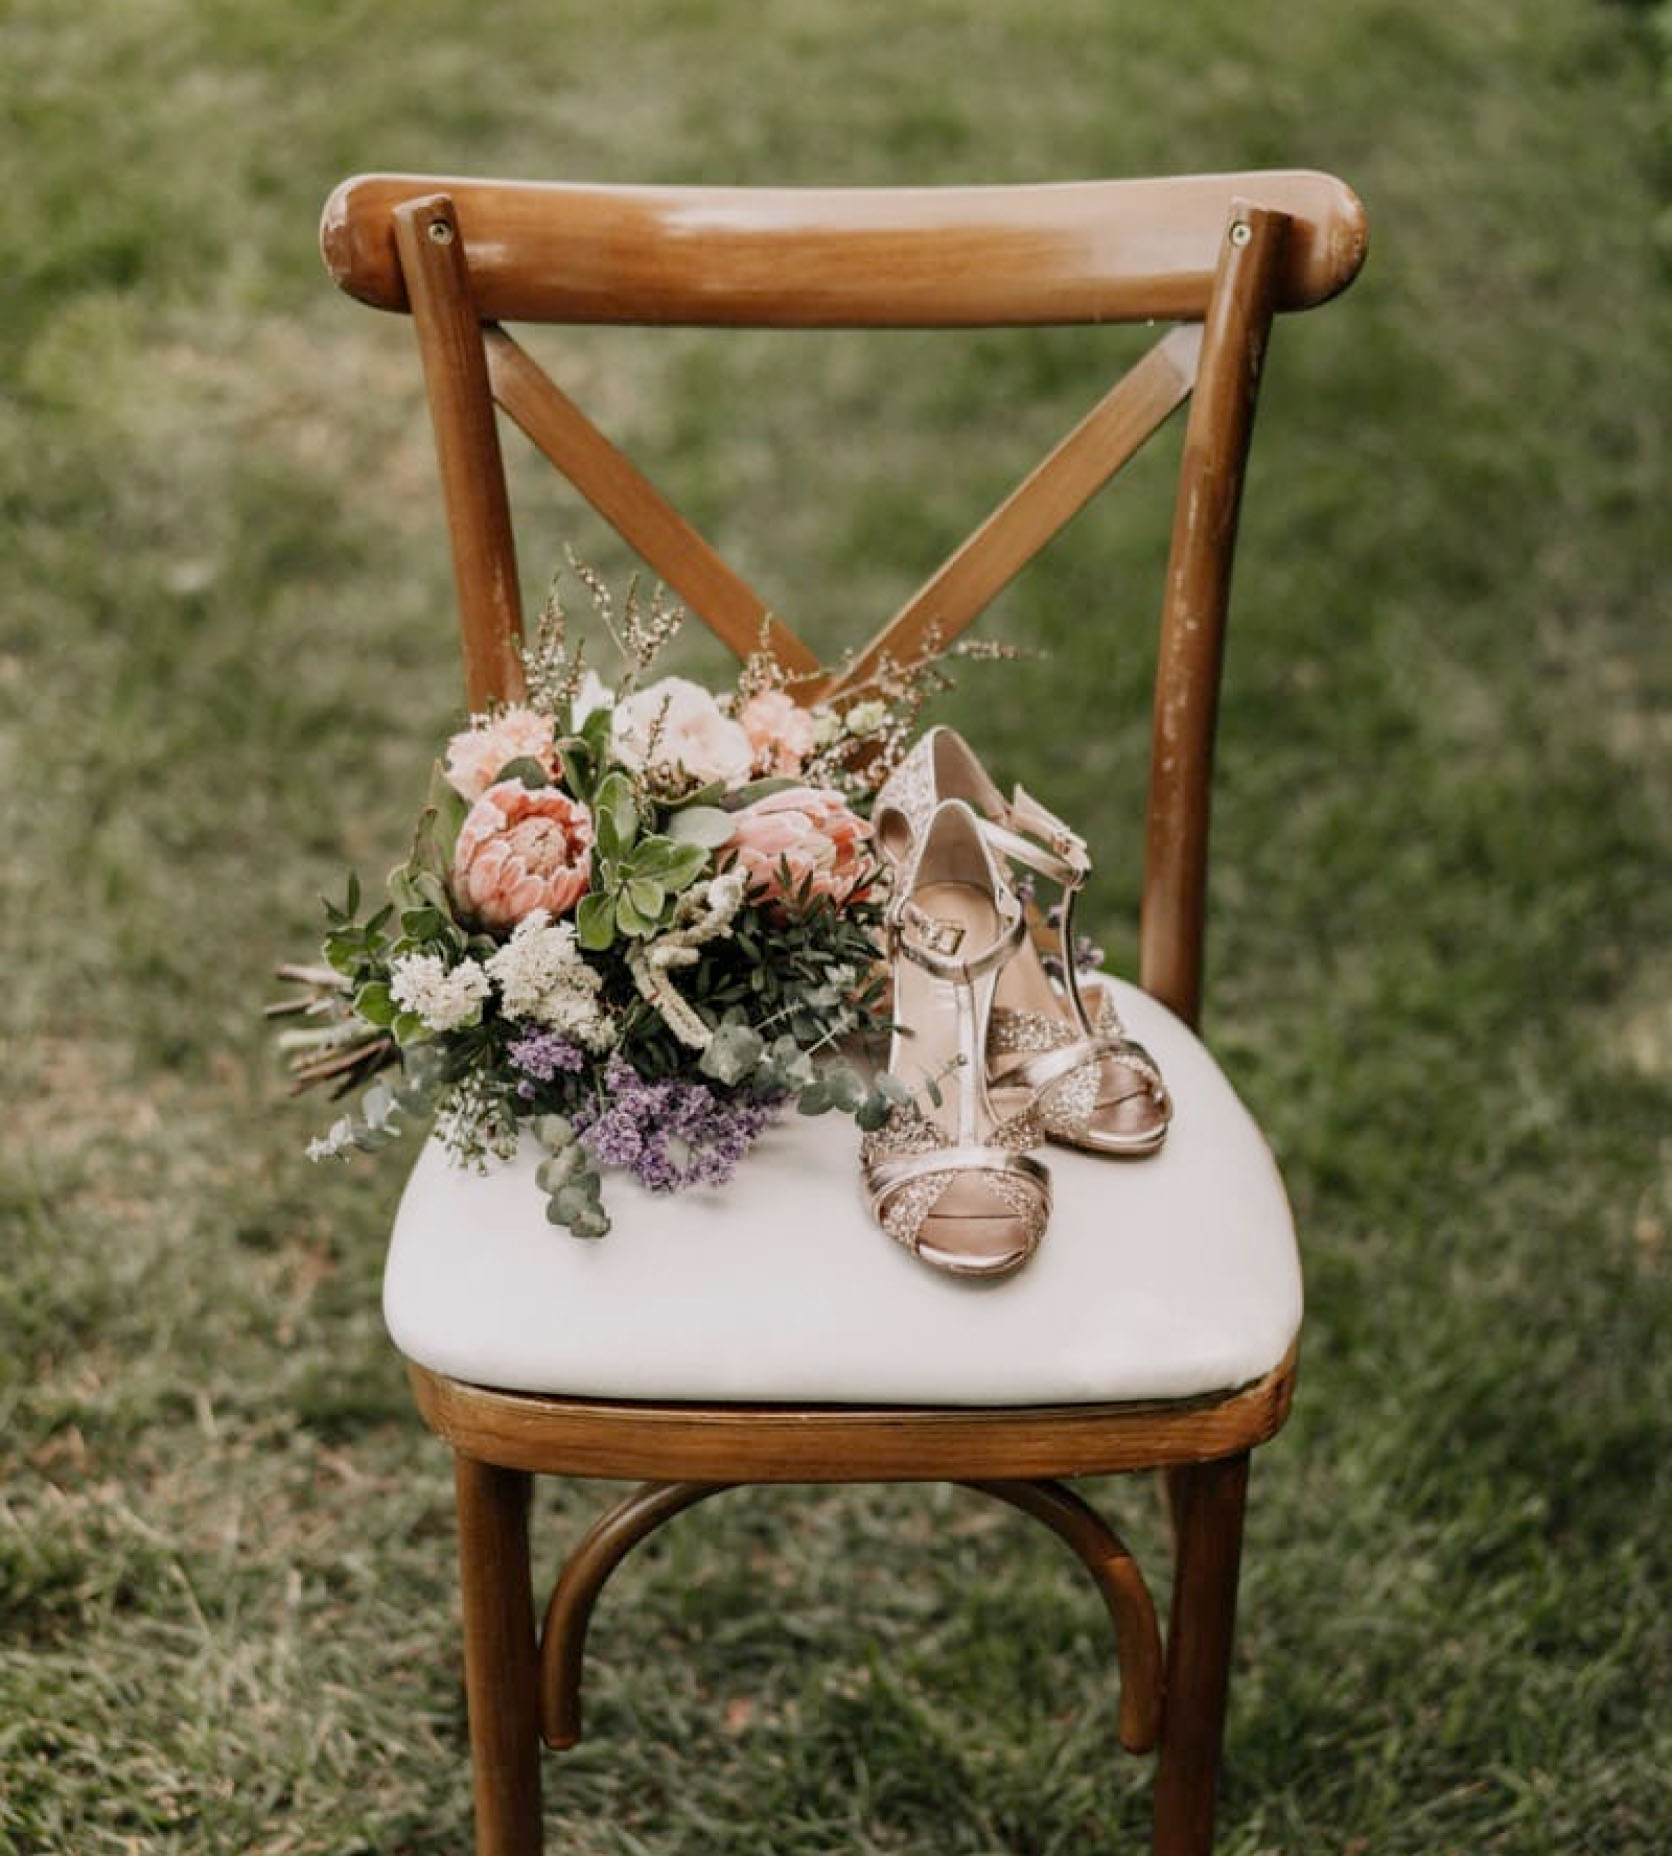 Feb Kes Wedding Shoes Bouquet on Chair